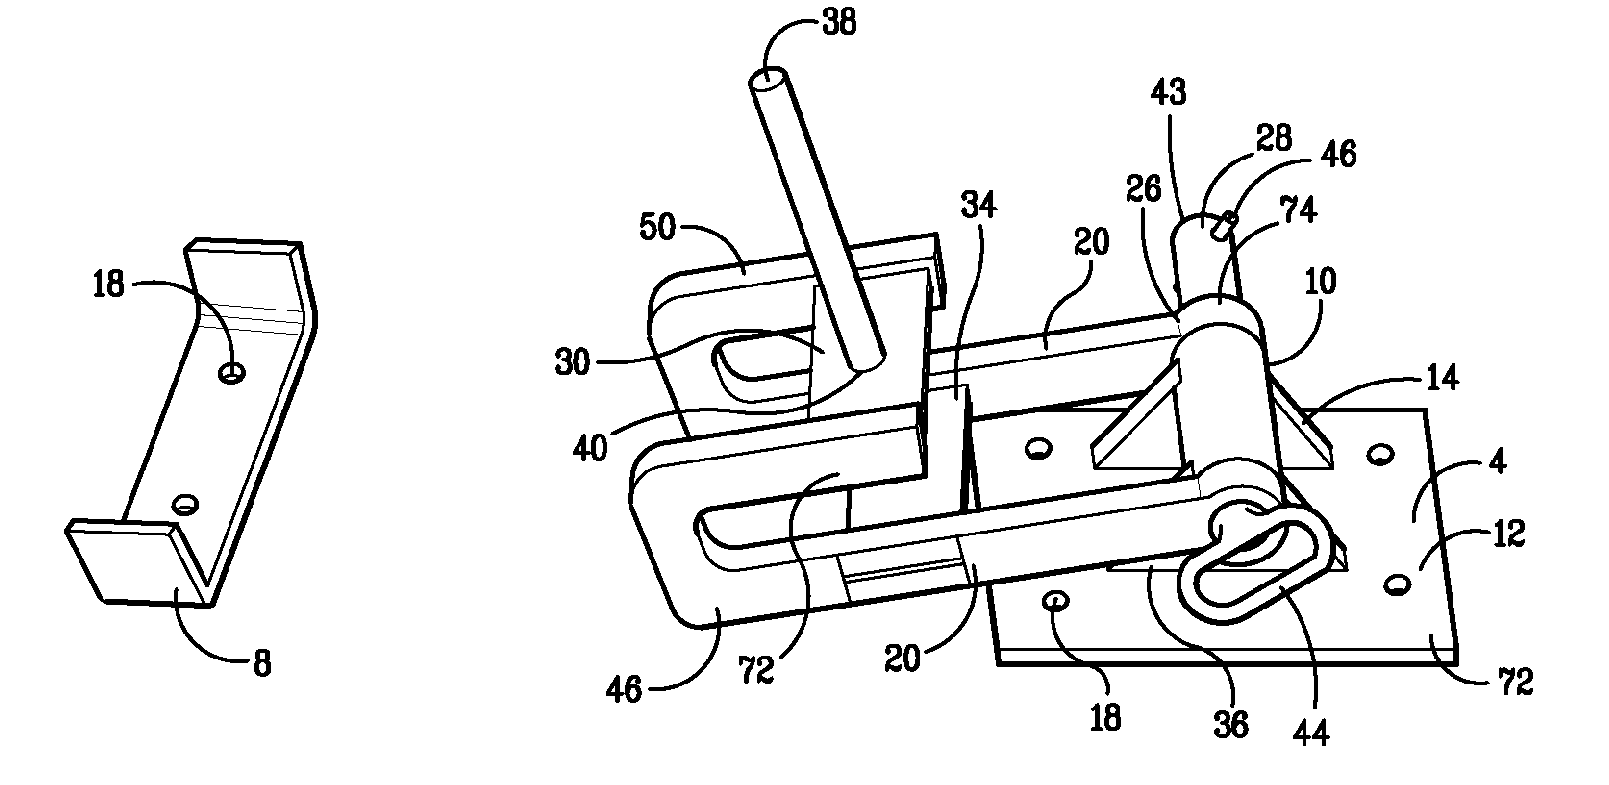 Bracket and Method for Transport of Articulated Arm Attachment